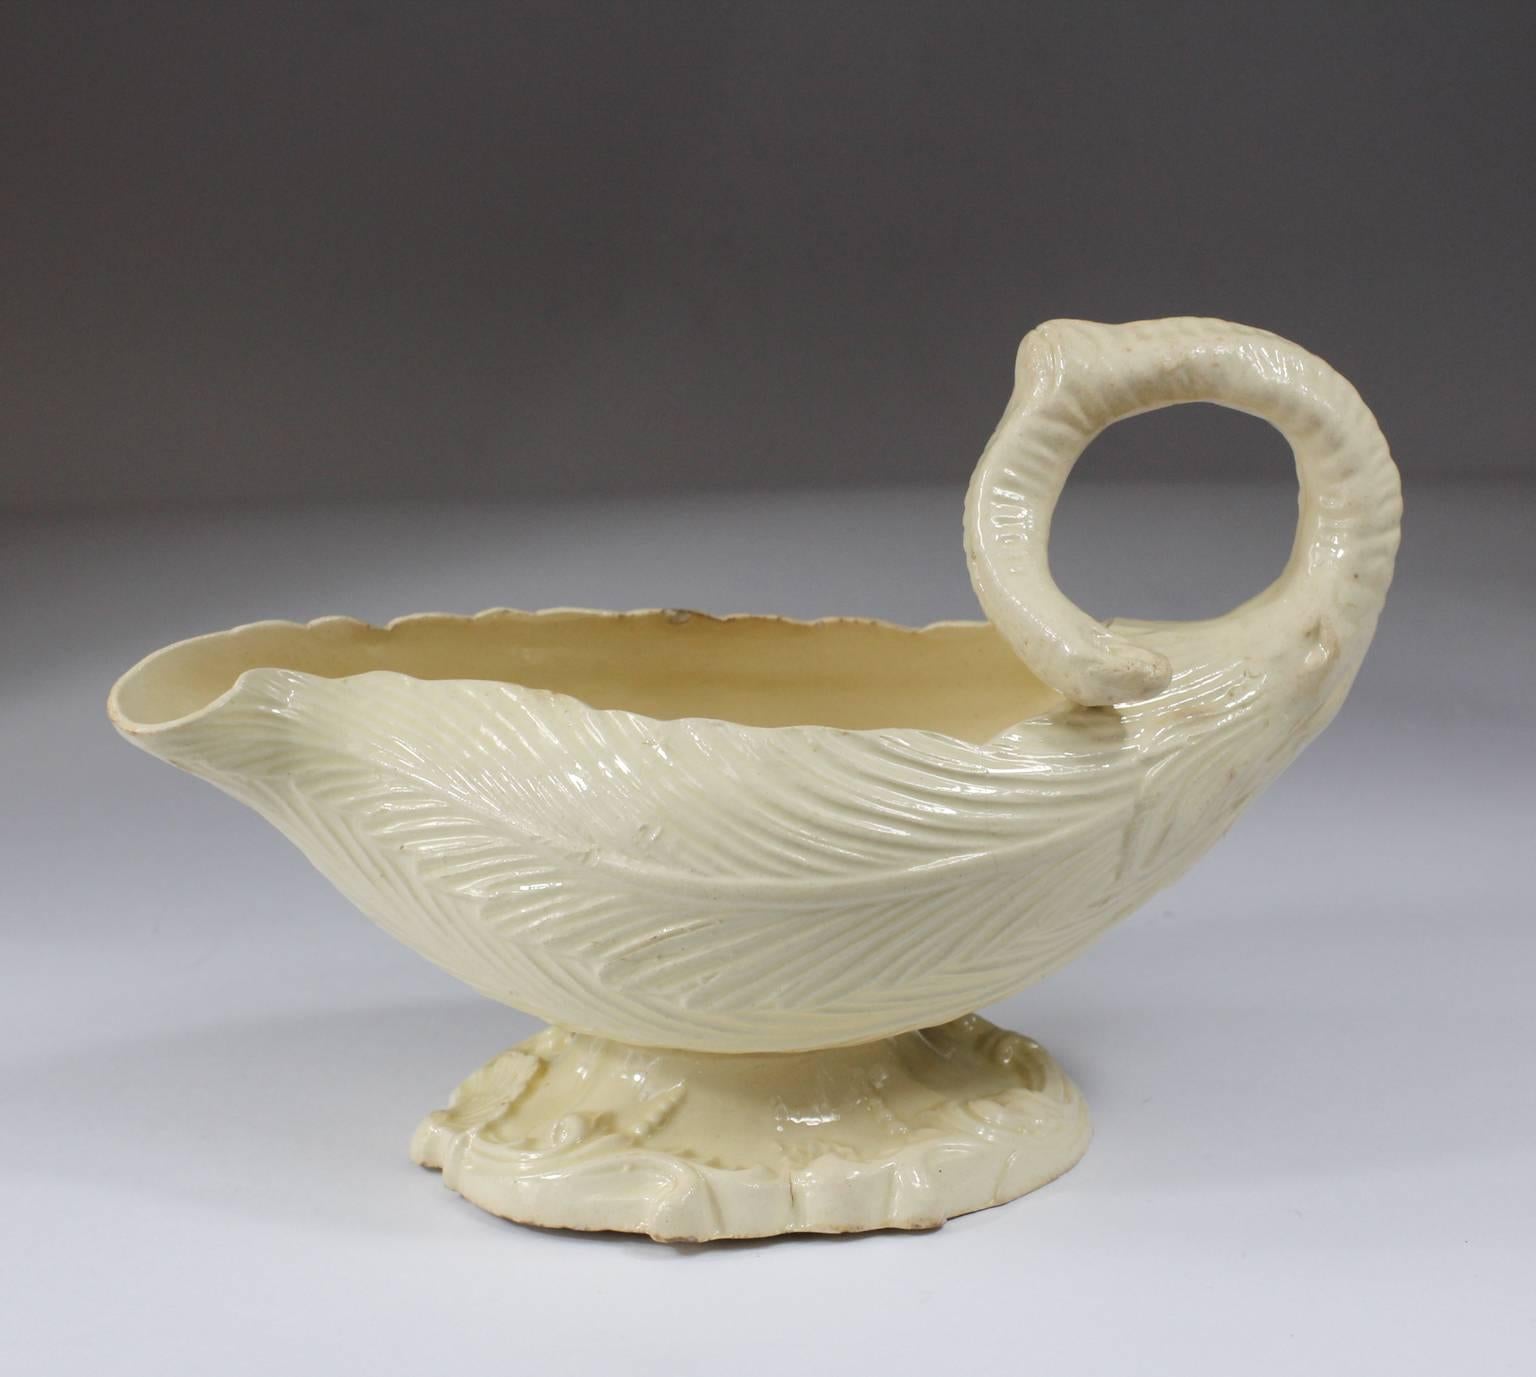 Rare English creamware sauceboat, of Rococo silver form, the upper vessel modeled as interlocking cos lettuce leaves with a scrolling stalk handle, the base with Rococo scroll moulding and a central scallop shell motif. 
Unmarked, circa 1760.